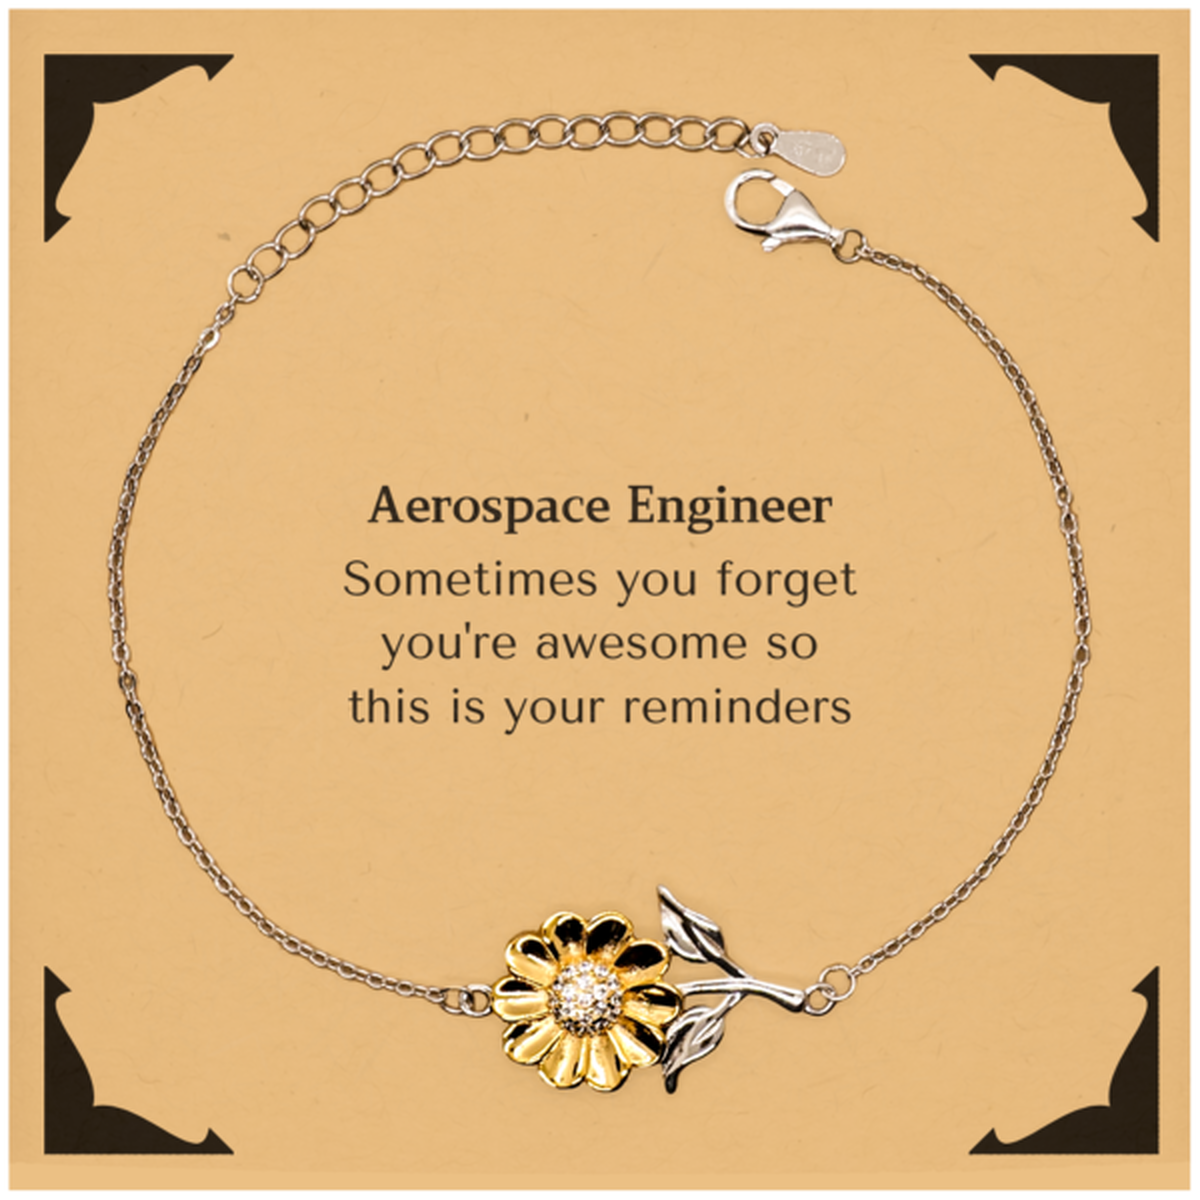 Sentimental Aerospace Engineer Sunflower Bracelet, Aerospace Engineer Sometimes you forget you're awesome so this is your reminders, Graduation Christmas Birthday Gifts for Aerospace Engineer, Men, Women, Coworkers